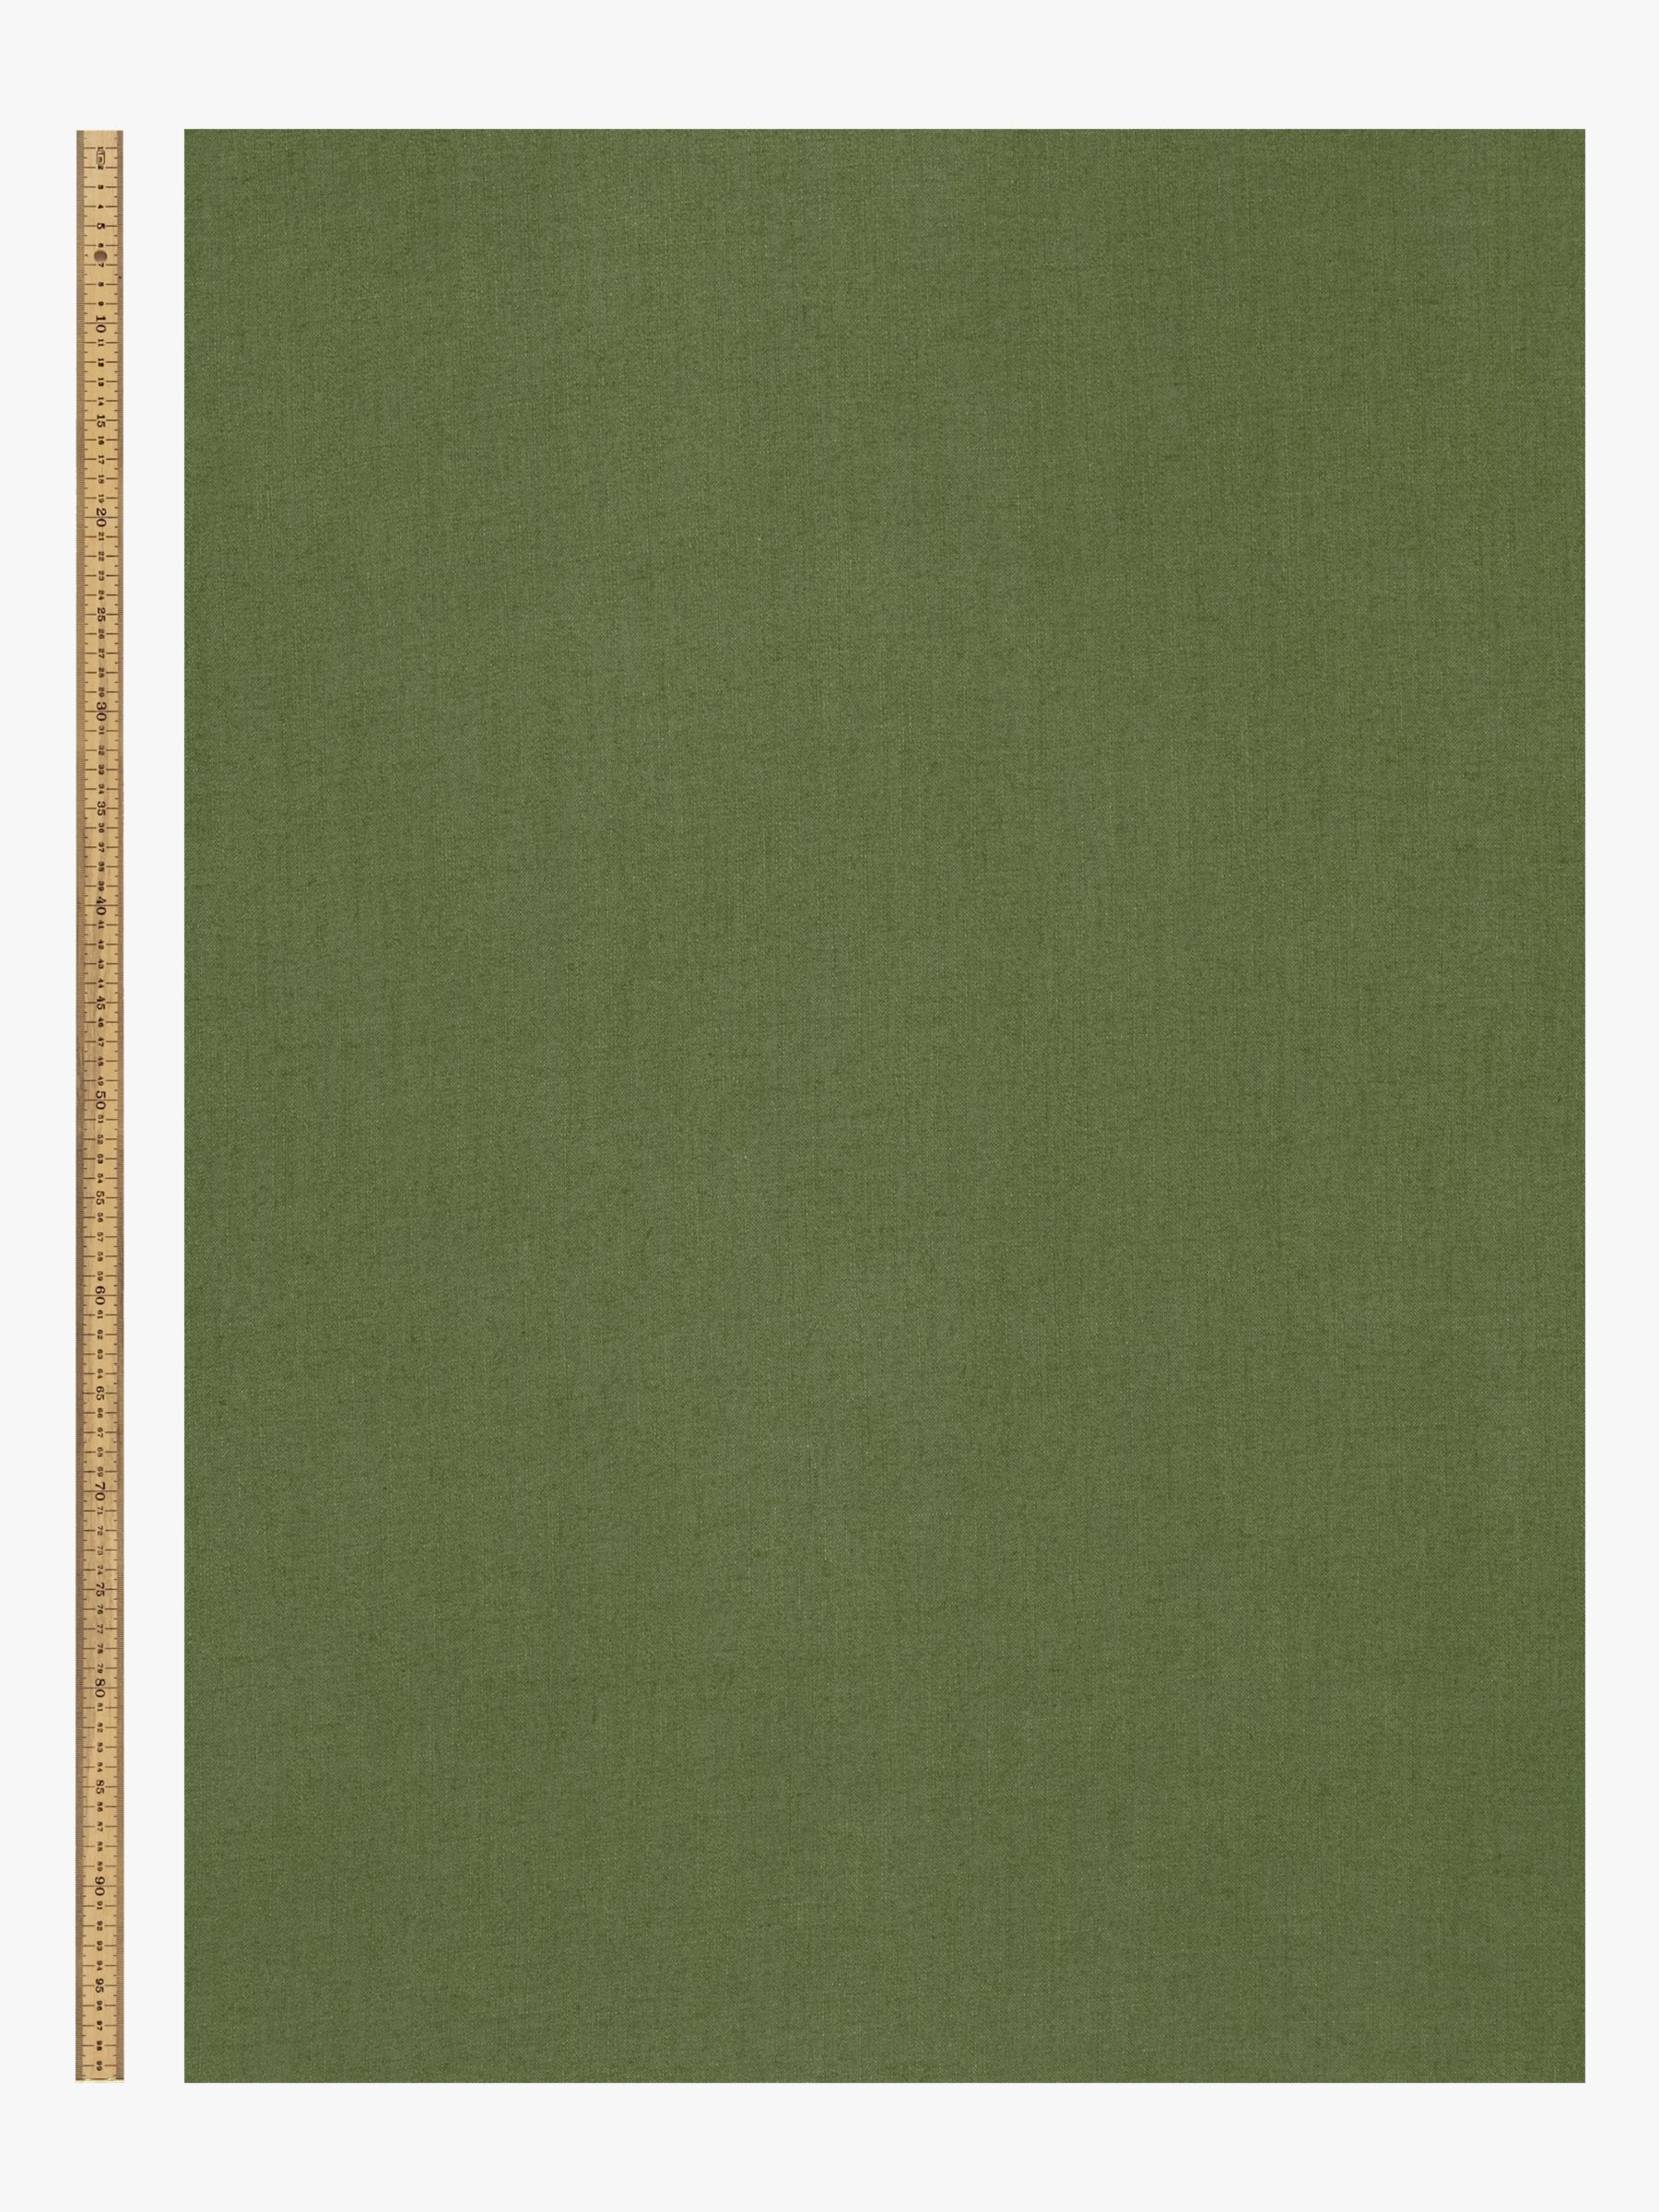 John Lewis Relaxed Linen Plain Fabric, Olive Green, Price Band B